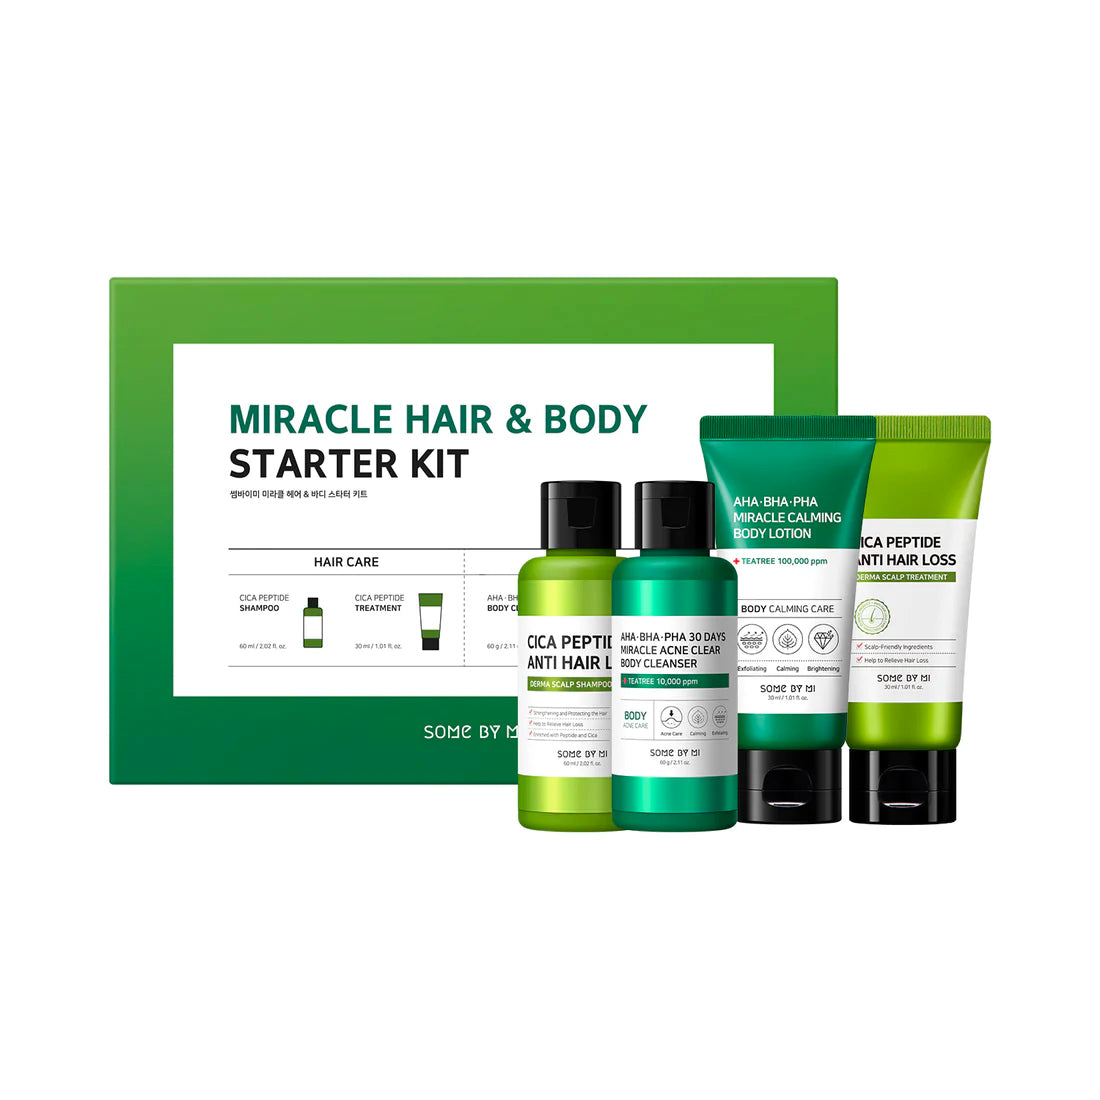 Some By Mi Miracle Hair & Body Starter Kit Beauty SOME BY MI   